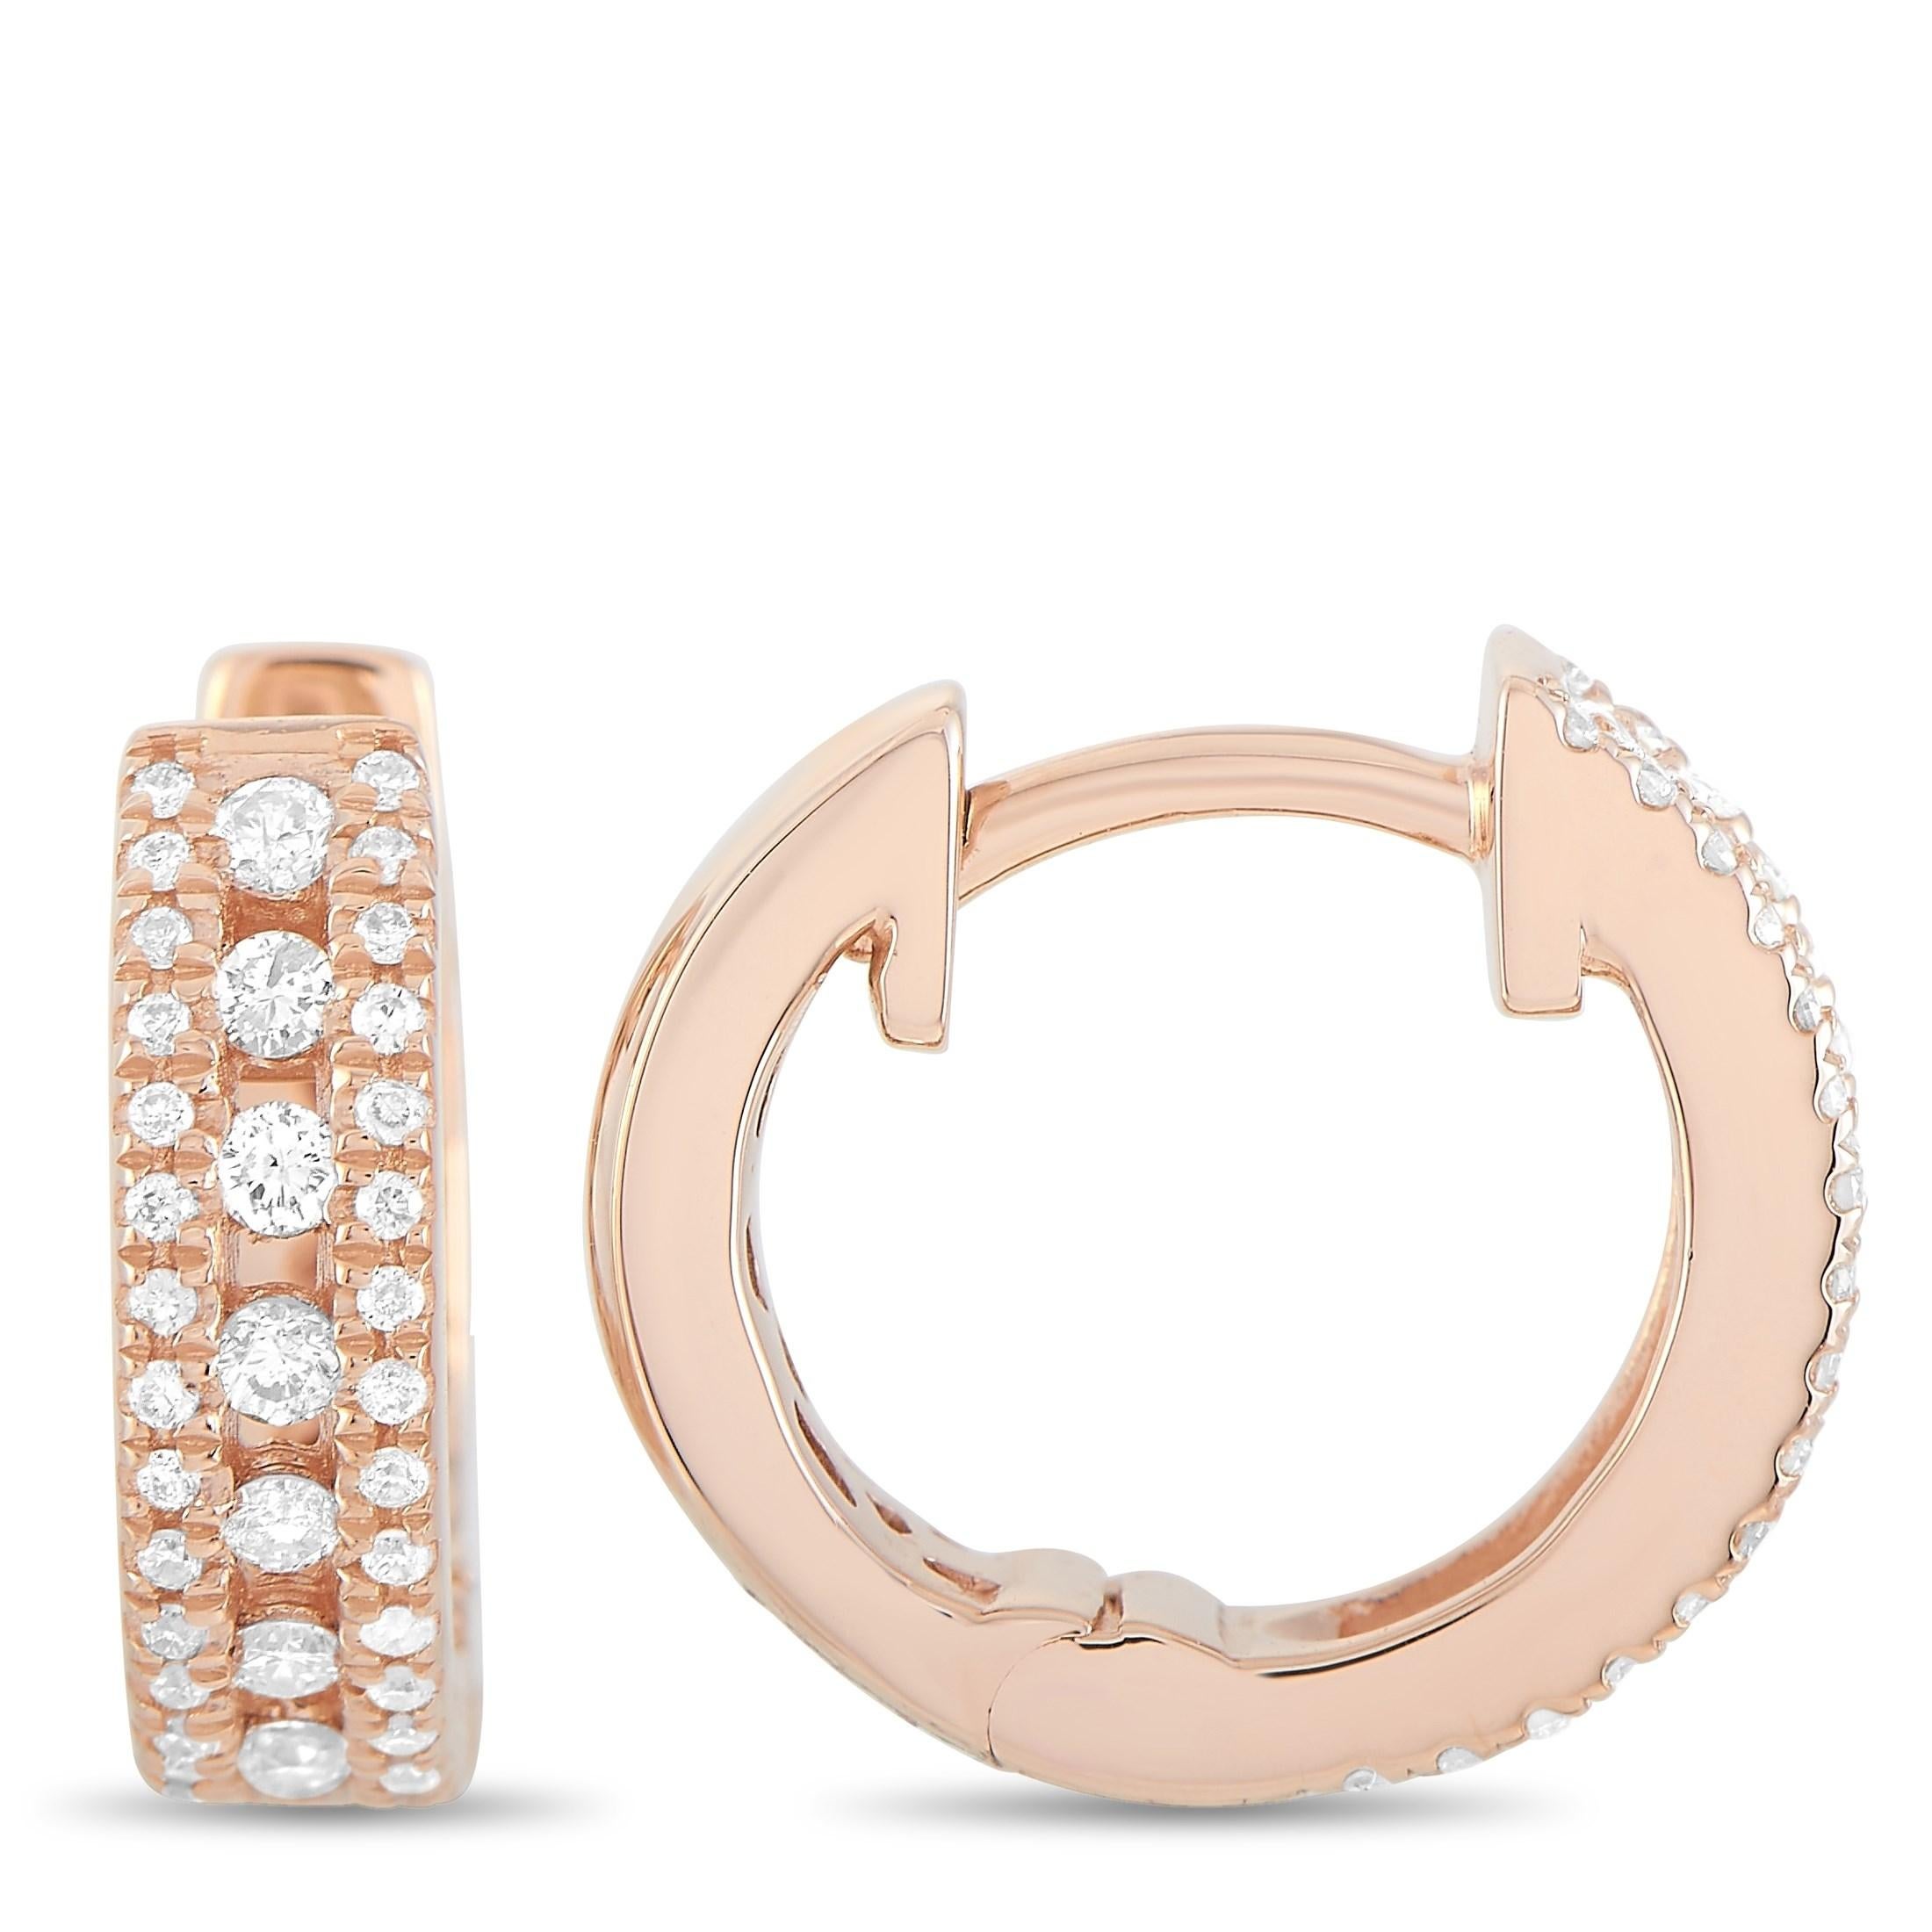 These LB Exclusive hoop earrings are crafted from 14K rose gold and each of the two weighs 1 gram. They measure 0.37” in length and 0.10” in width. The pair is set with diamonds that total 0.35 carats.

The earrings are offered in brand-new